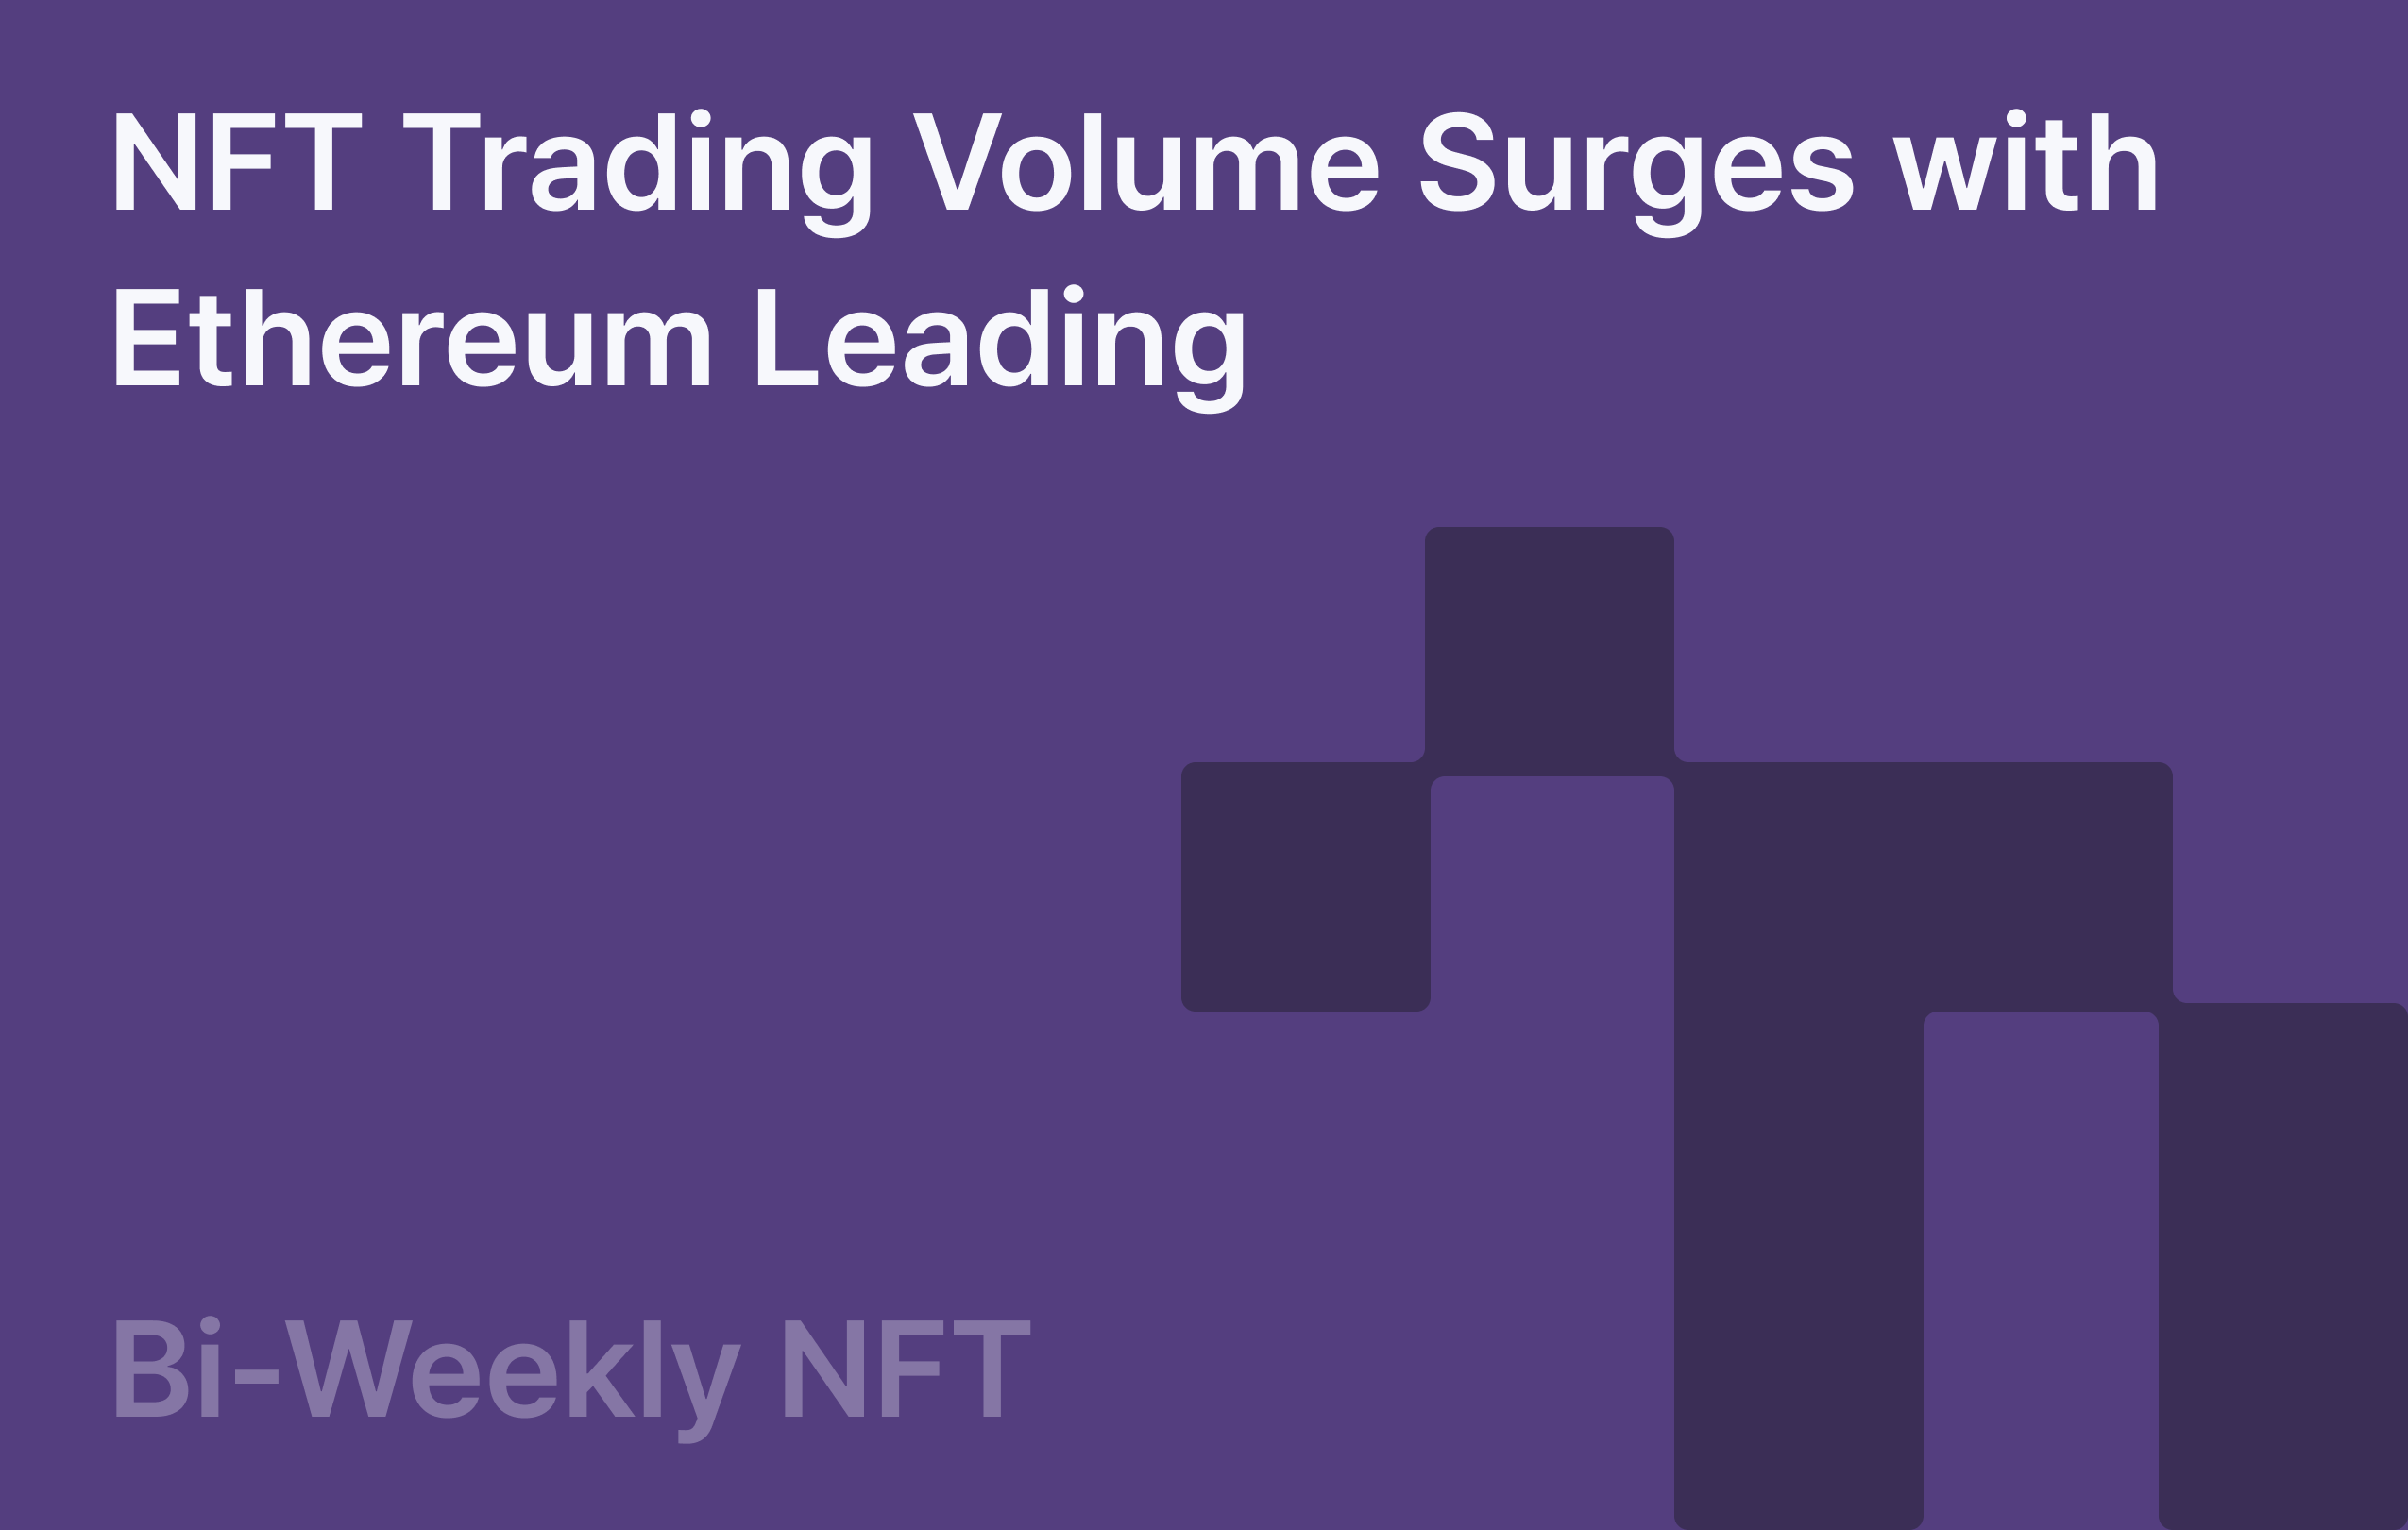 Bi-Weekly NFT: NFT Trading Volume Surges with Ethereum Leading